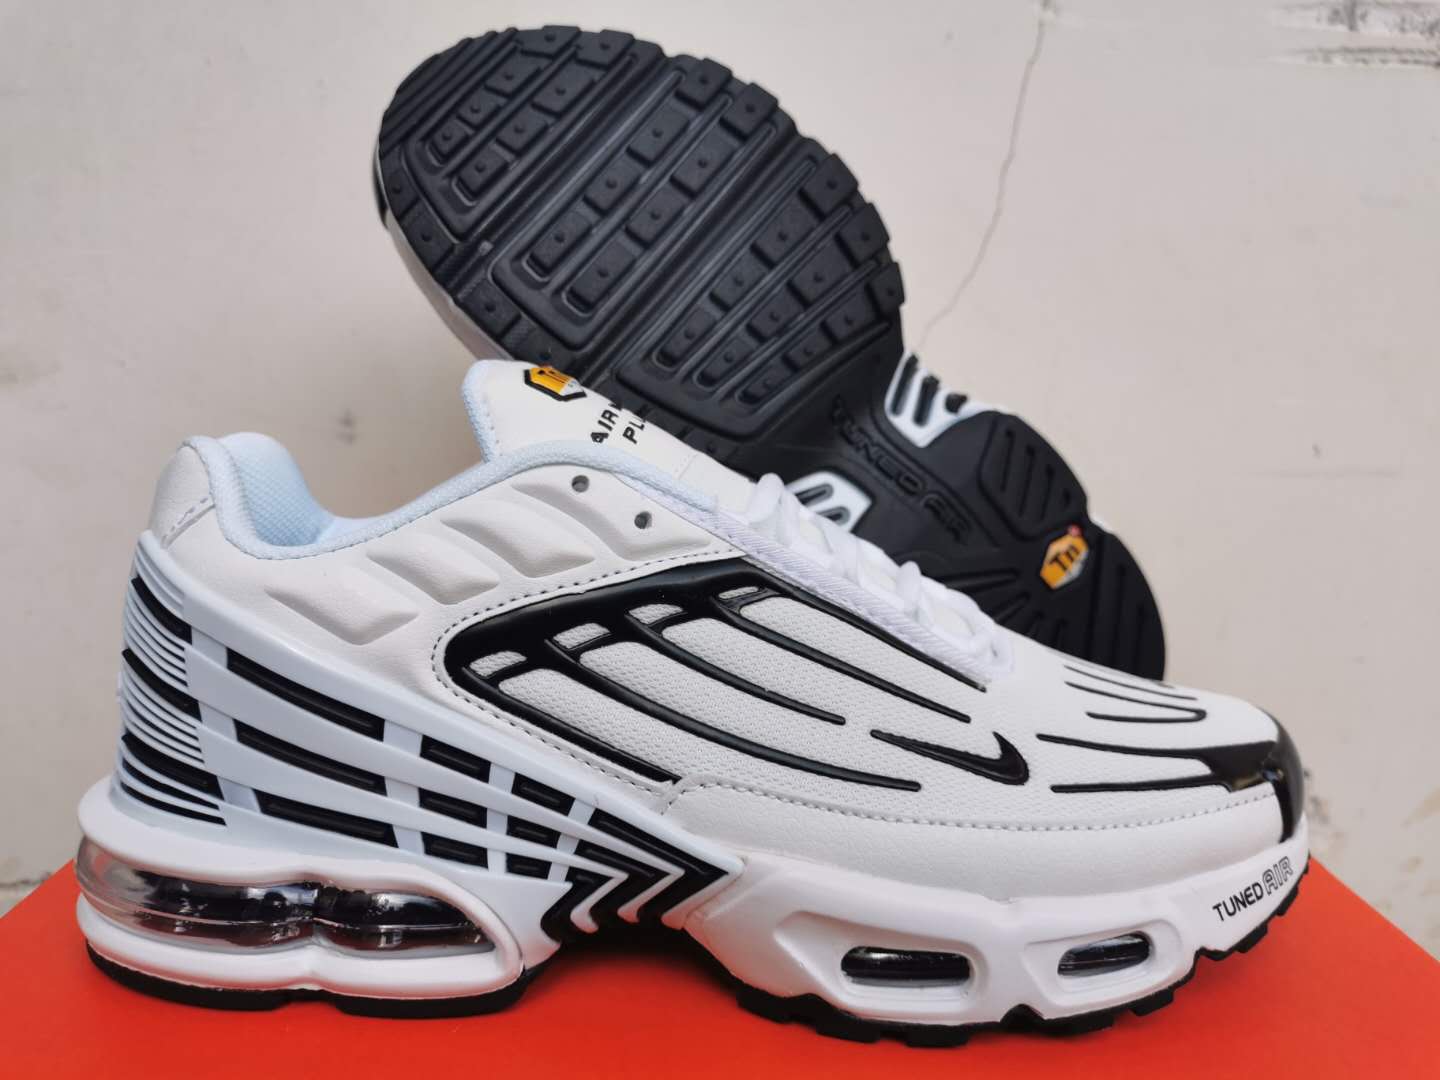 Men's Hot sale Running weapon Air Max TN Shoes 066